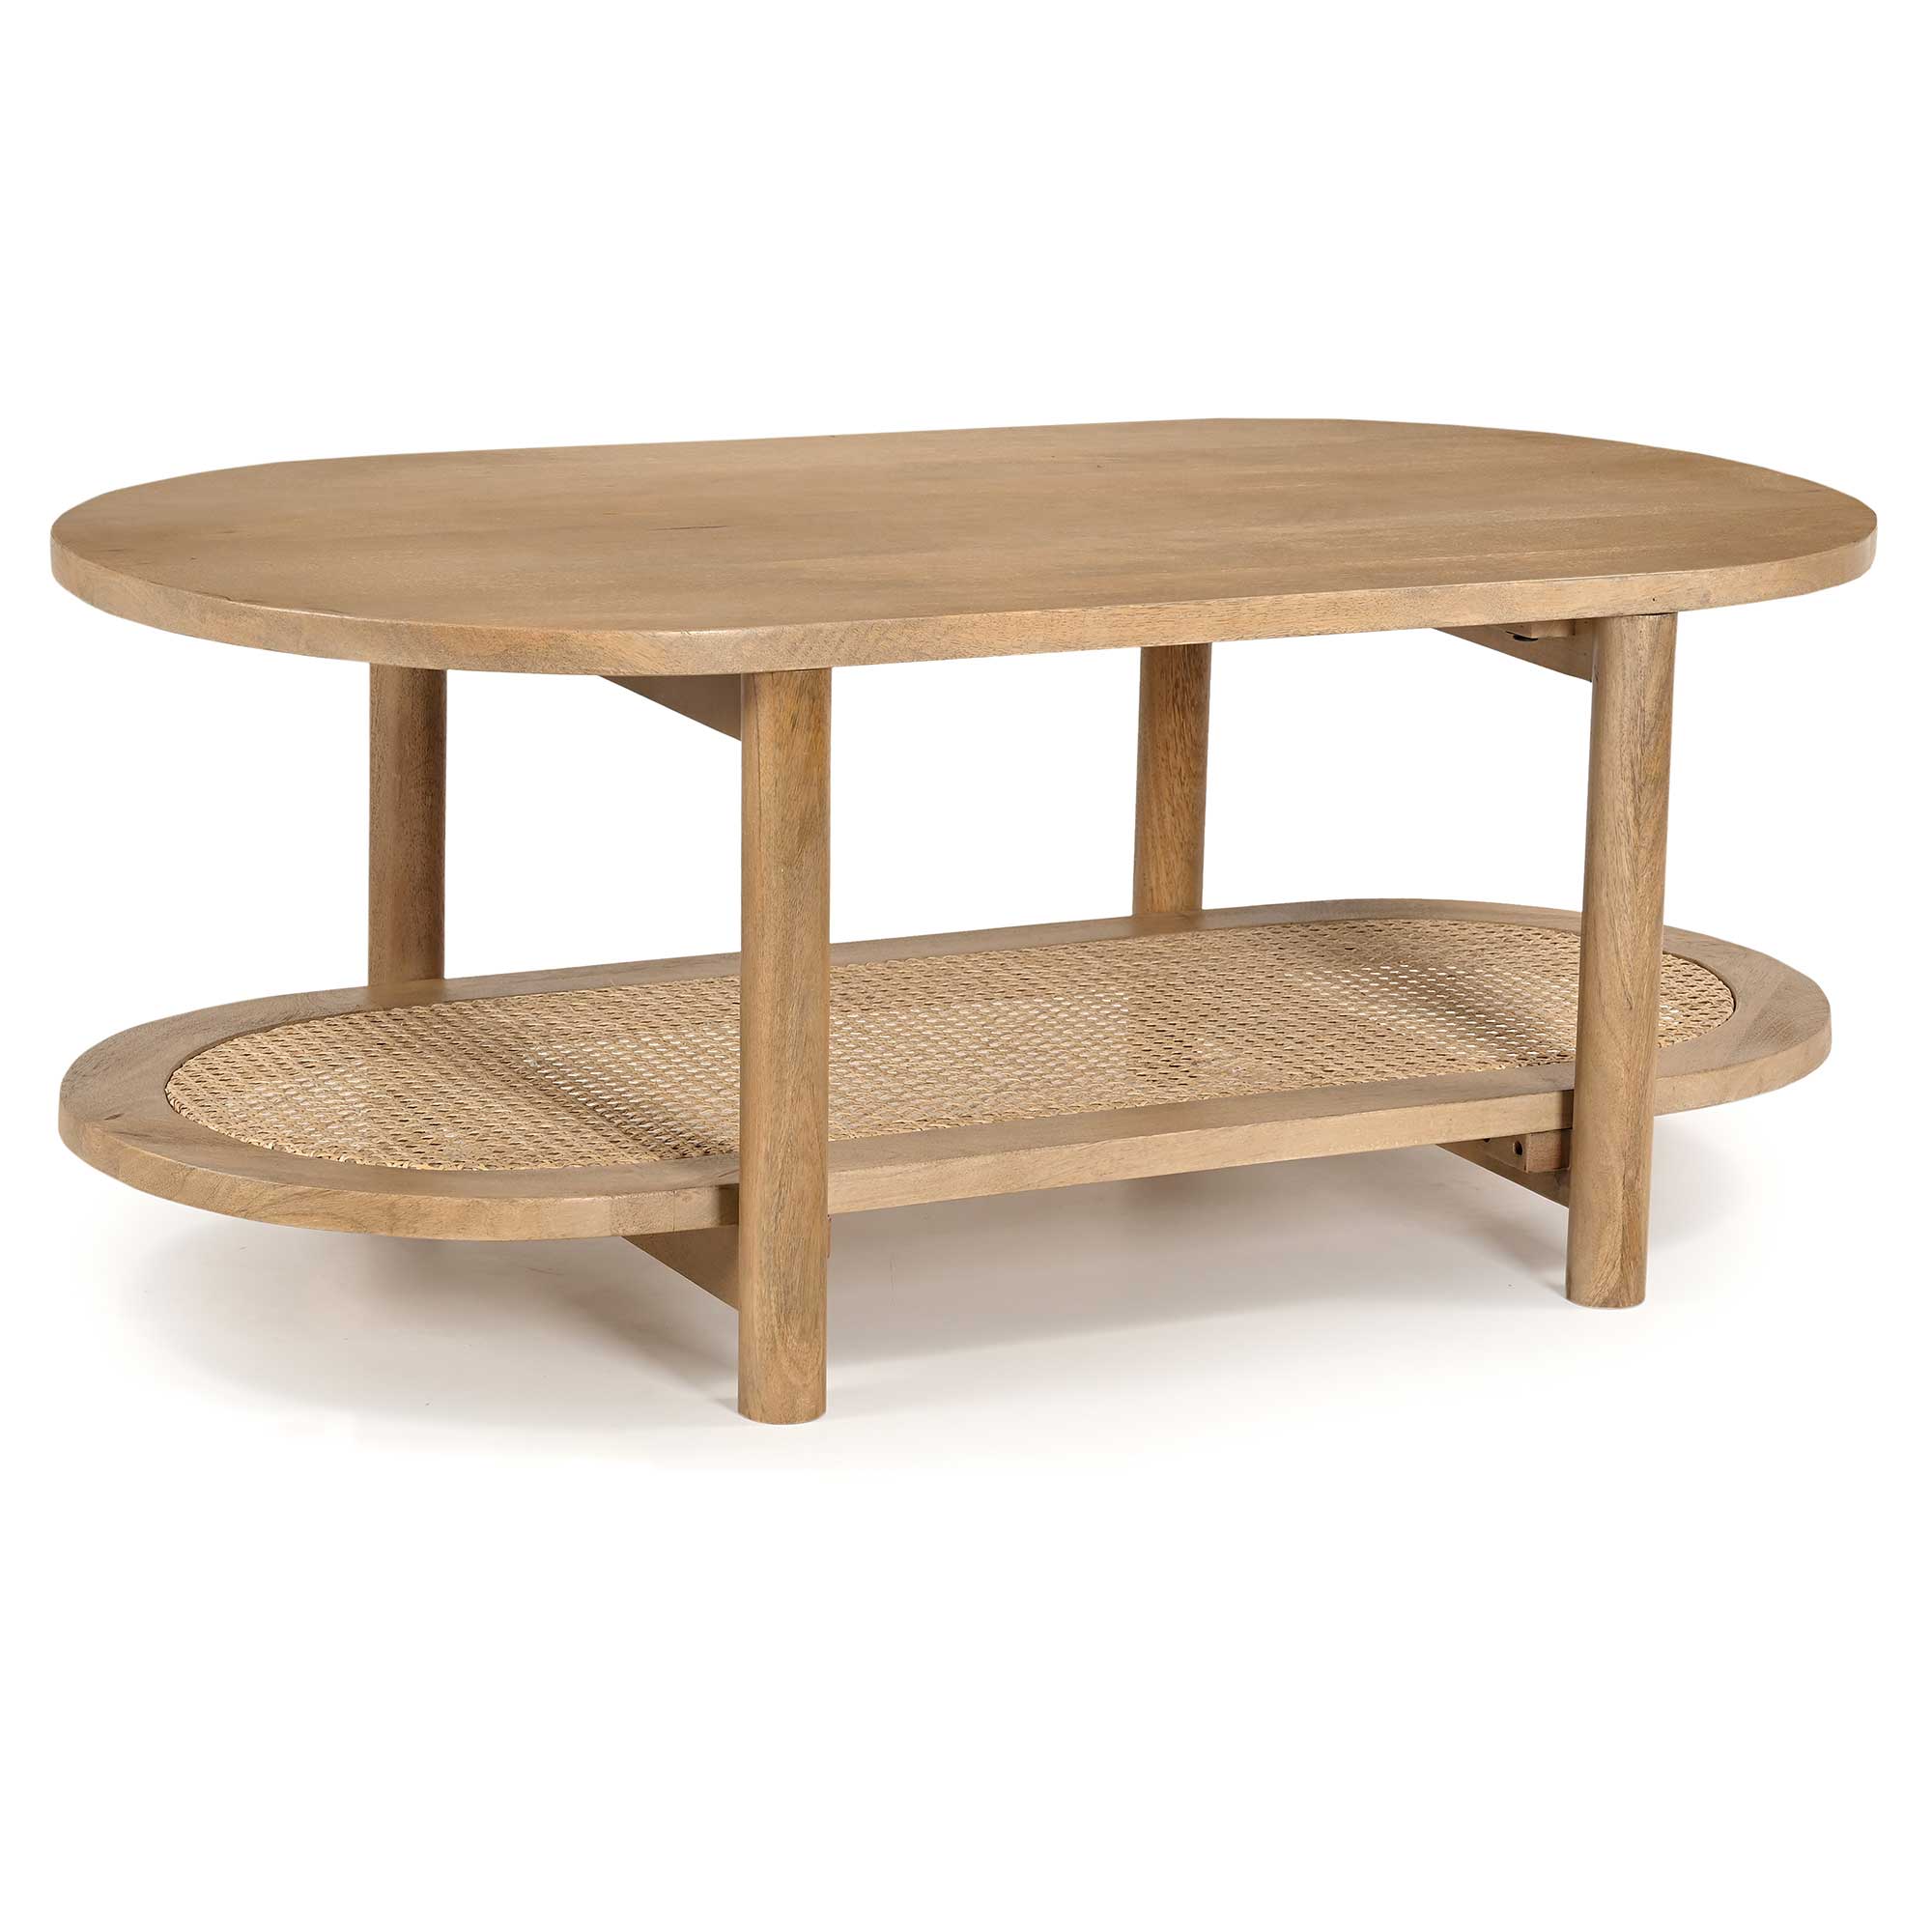 Asher Coffee Table 115cm, Round, Neutral | Barker & Stonehouse